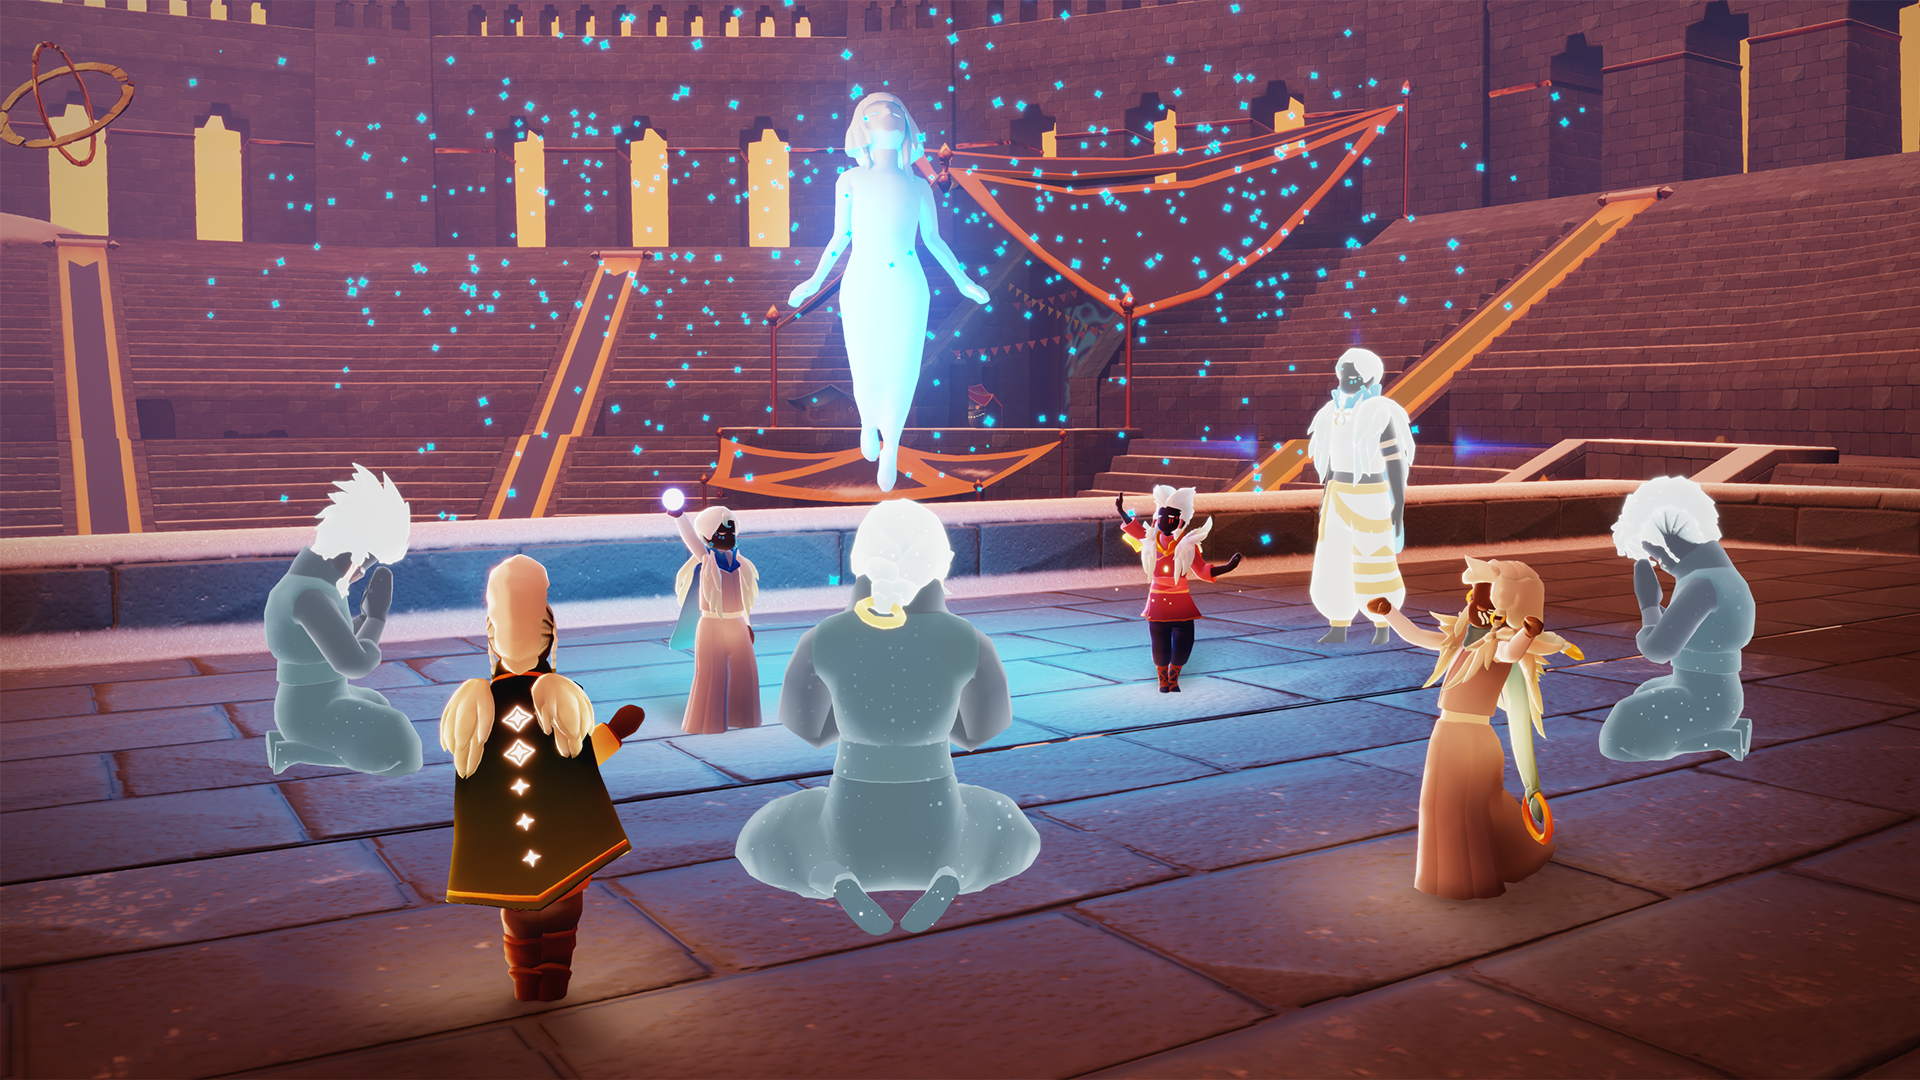 Image for Journey dev's Sky: Children of Light launching "musical experience" with Frozen 2 singer